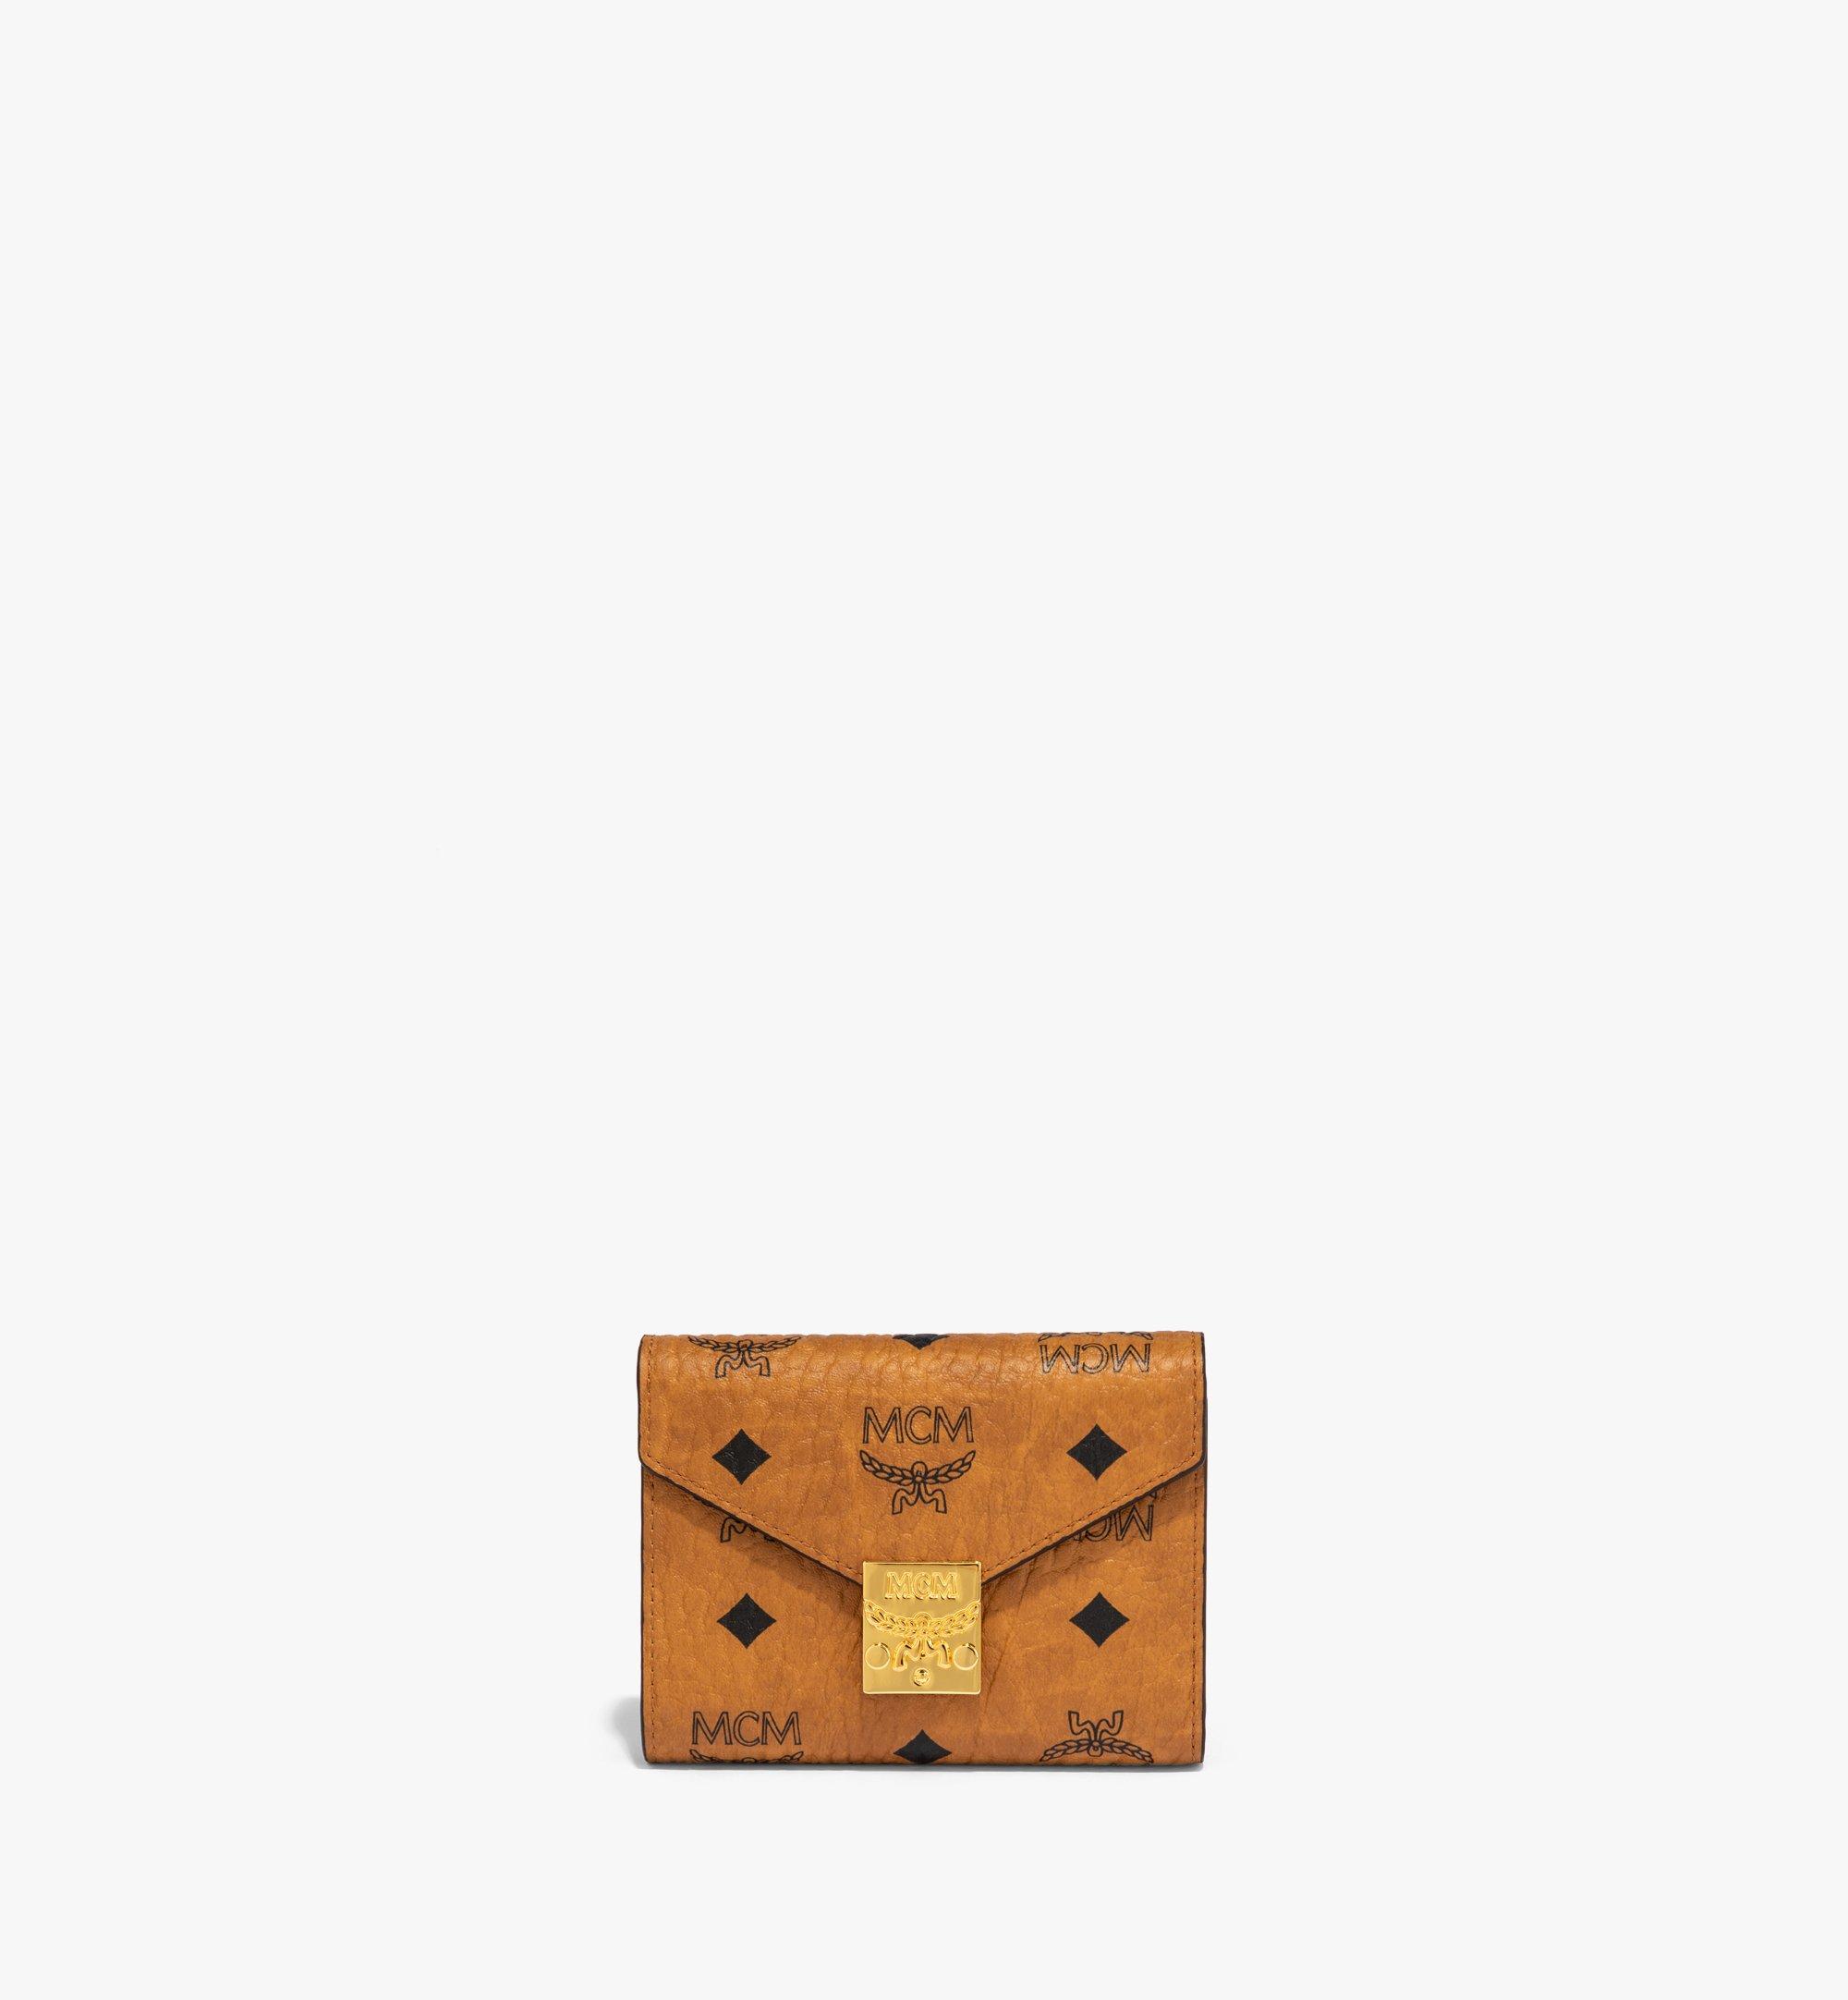 MCM Tracy Trifold Wallet in Visetos